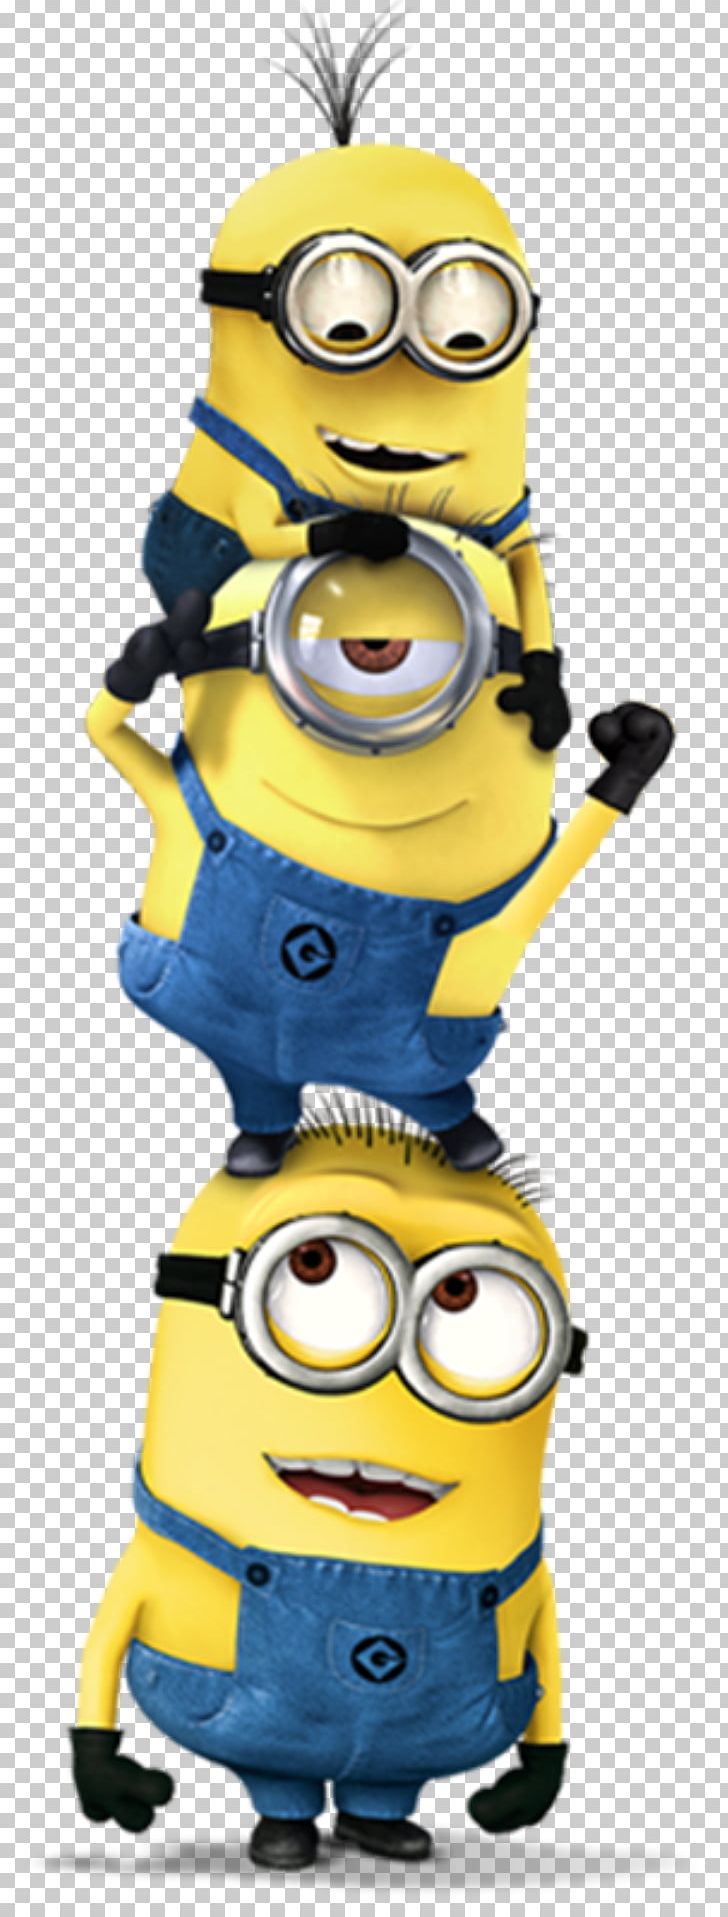 Kevin The Minion Dave The Minion Stuart The Minion Tim The Minion Minions PNG, Clipart, Dave The Minion, Despicable Me, Despicable Me 2, Despicable Me 3, Eyewear Free PNG Download